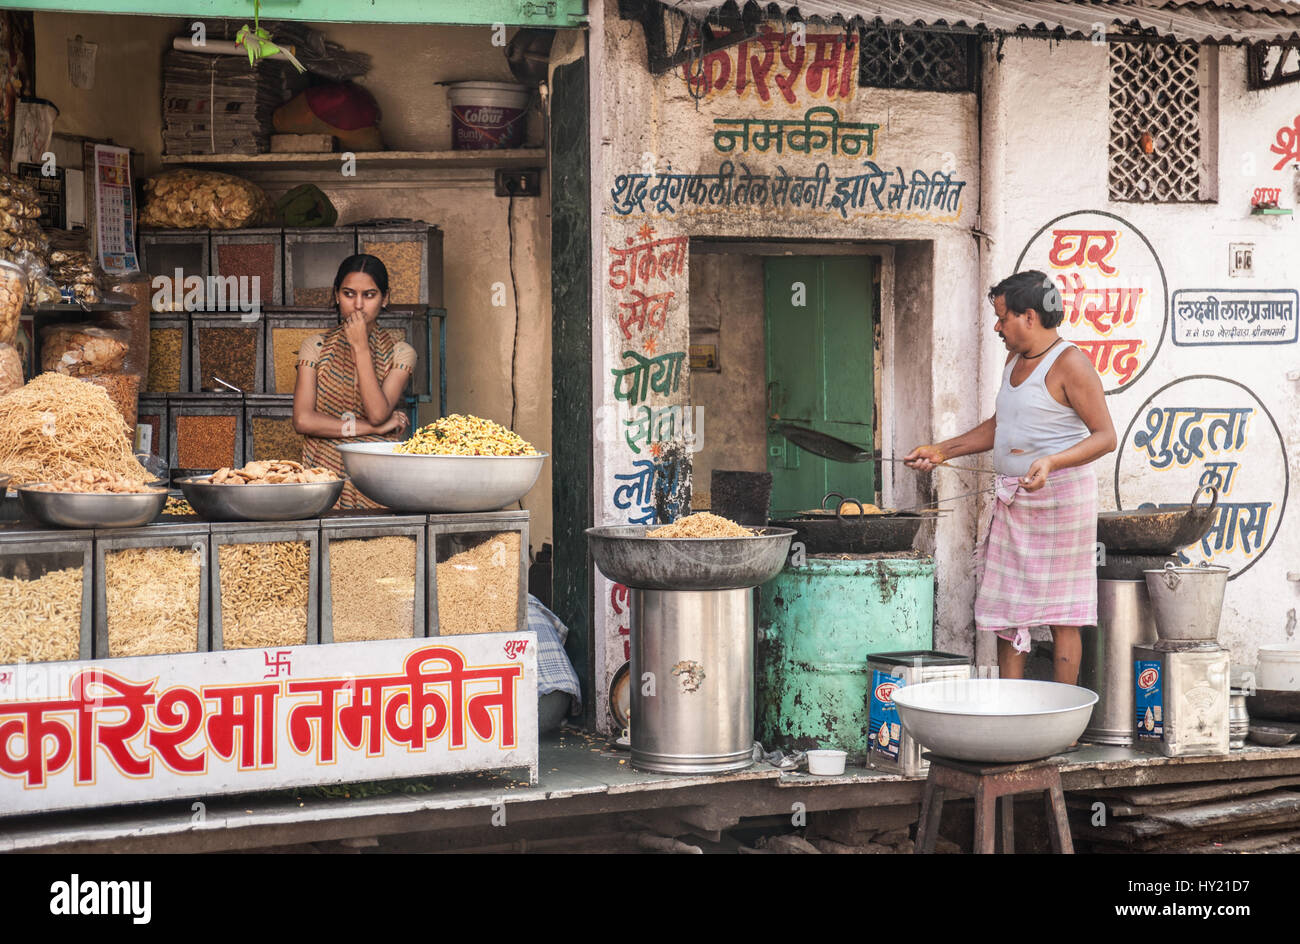 Chaat stall selling fried savoury Indian snacks, Udaipur Stock Photo